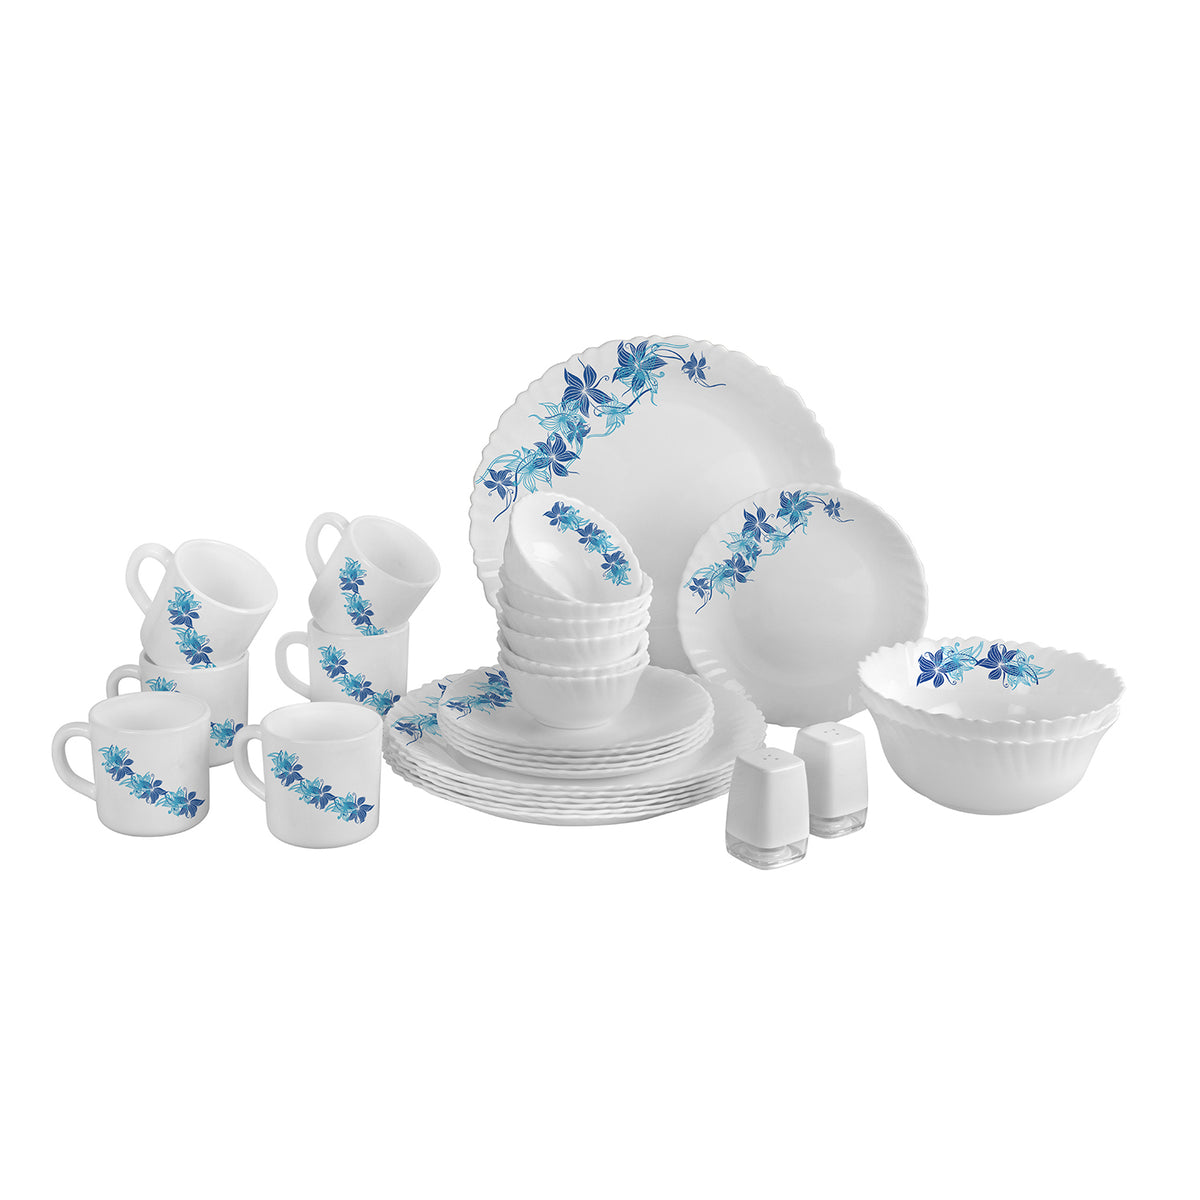 Dazzle Series 29 Pieces Opalware Dinner Set for Family of 6 Blue Swirl / With Stella Mug Medium